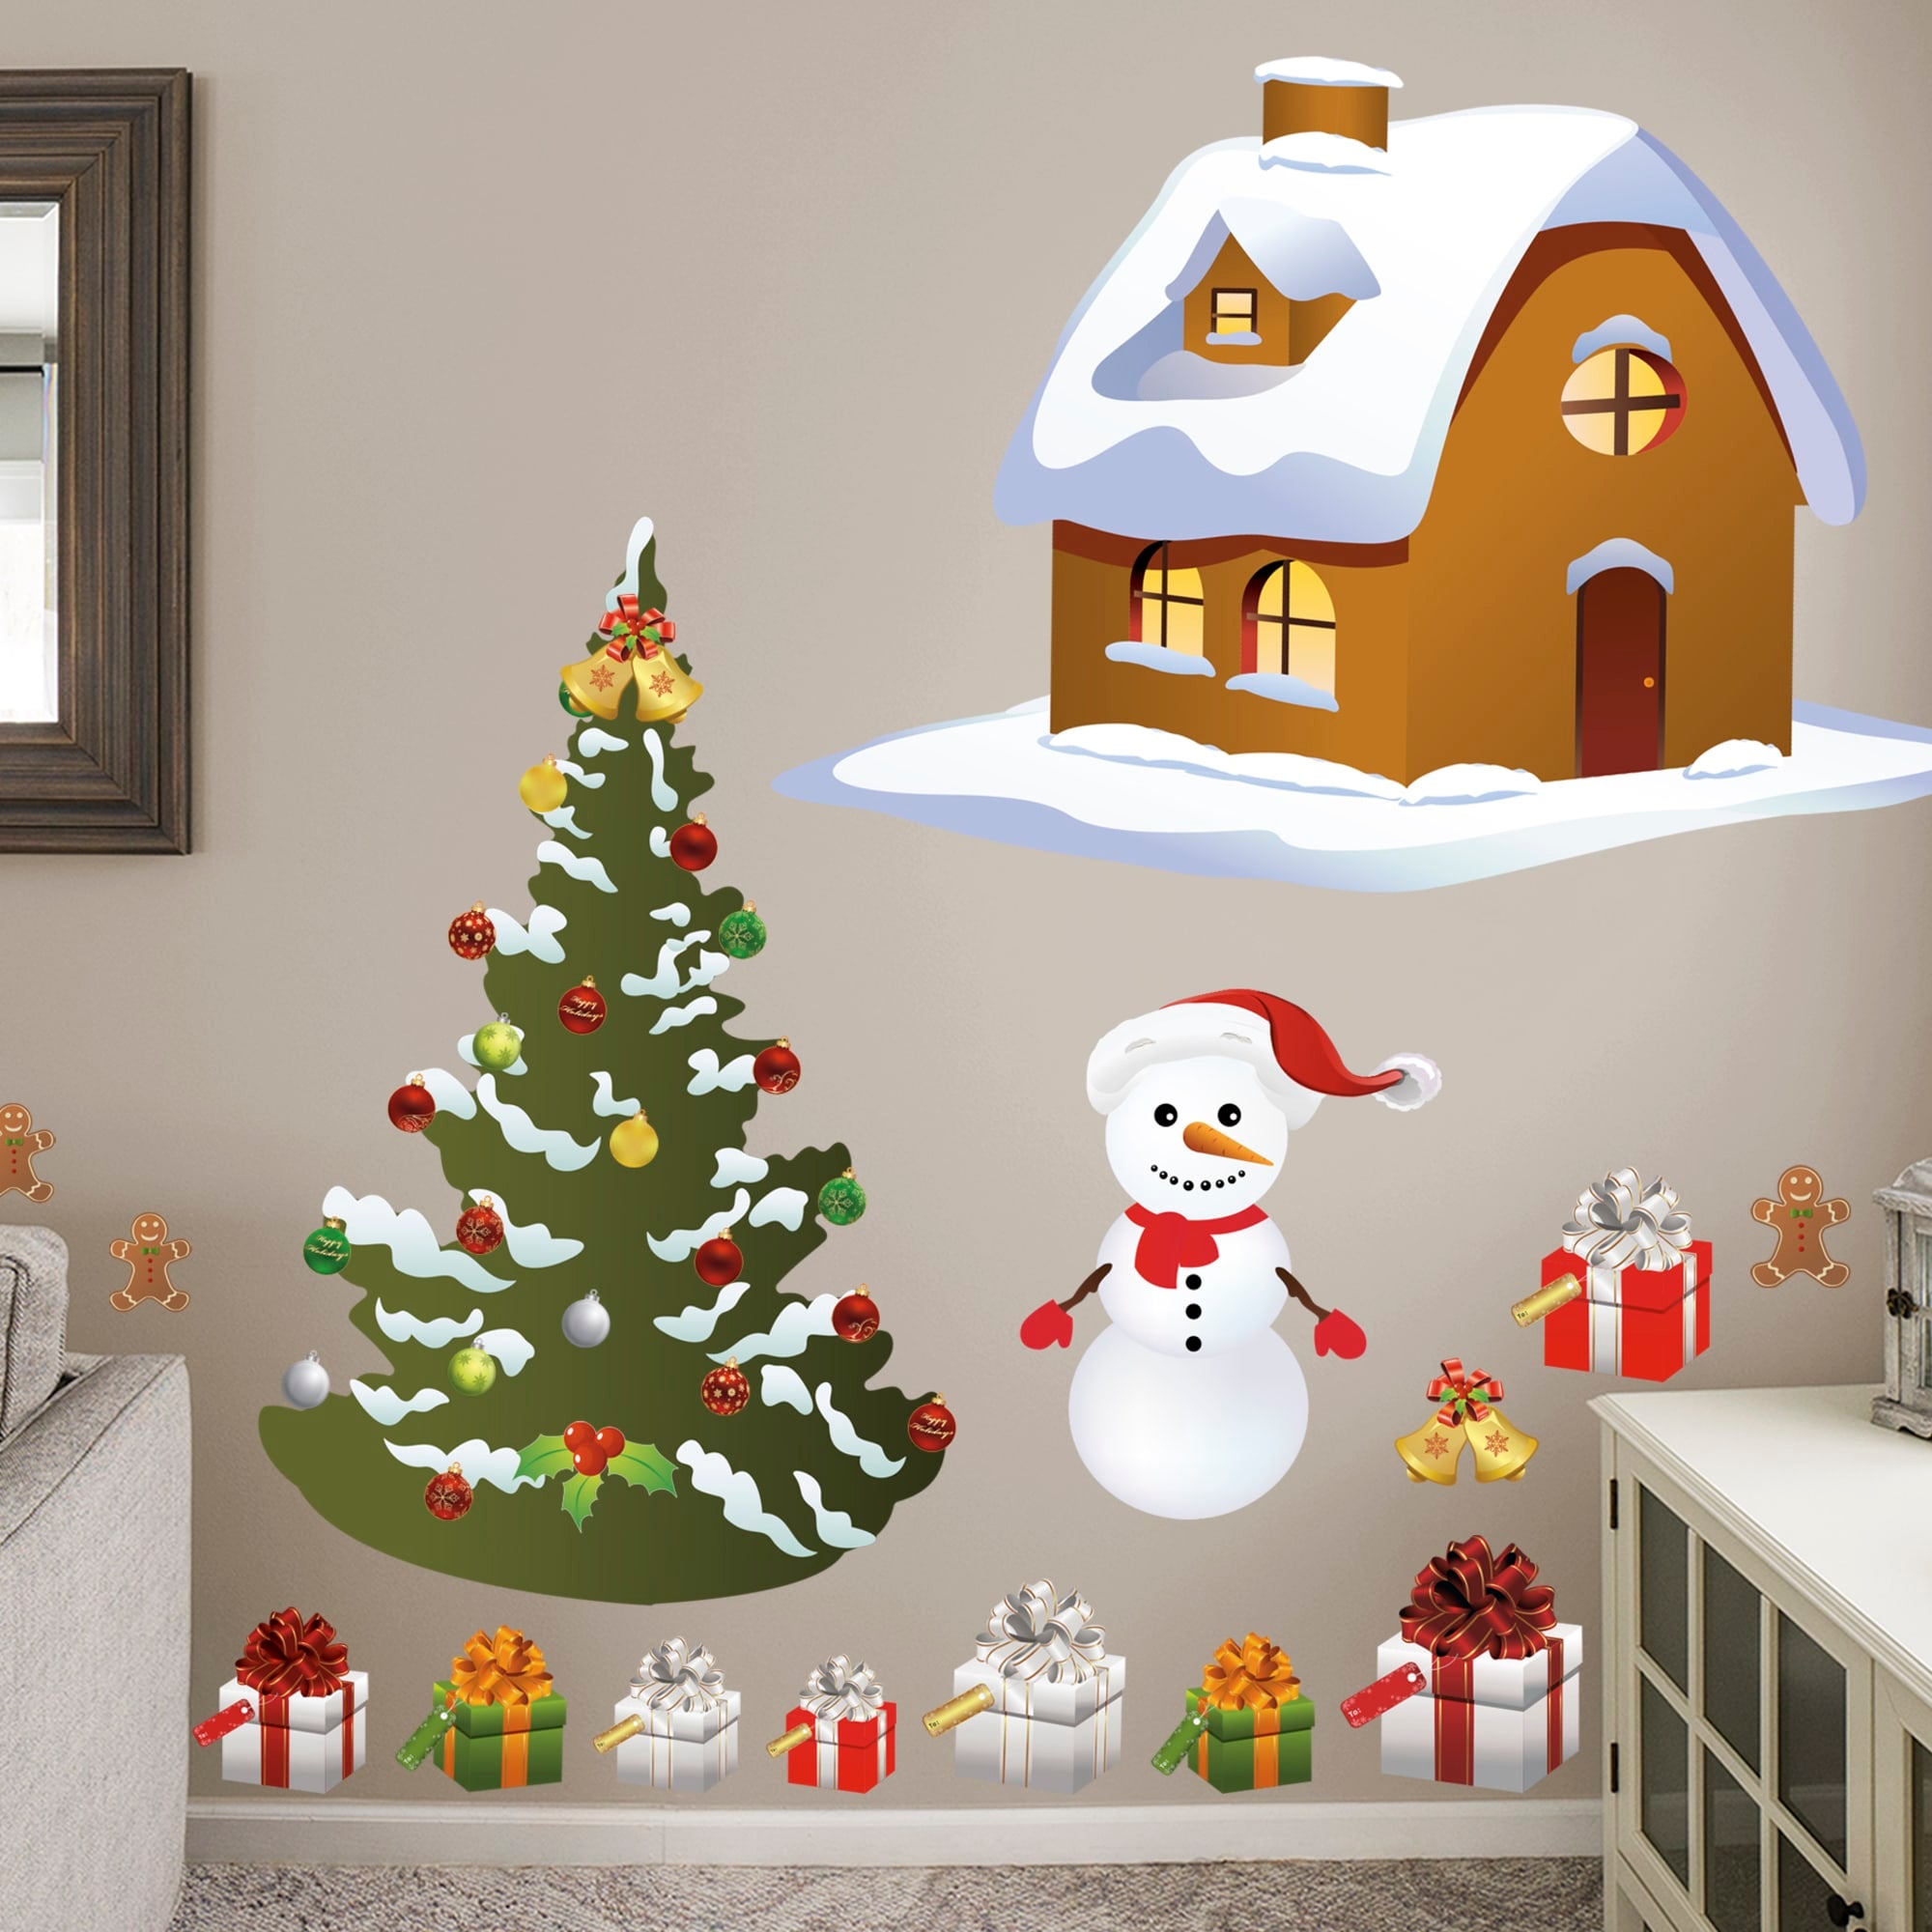 CHRISTMAS: WINTER WONDERLAND COLLECTION - REMOVABLE VINYL DECAL 79.0"W x 52.0"H by Fathead